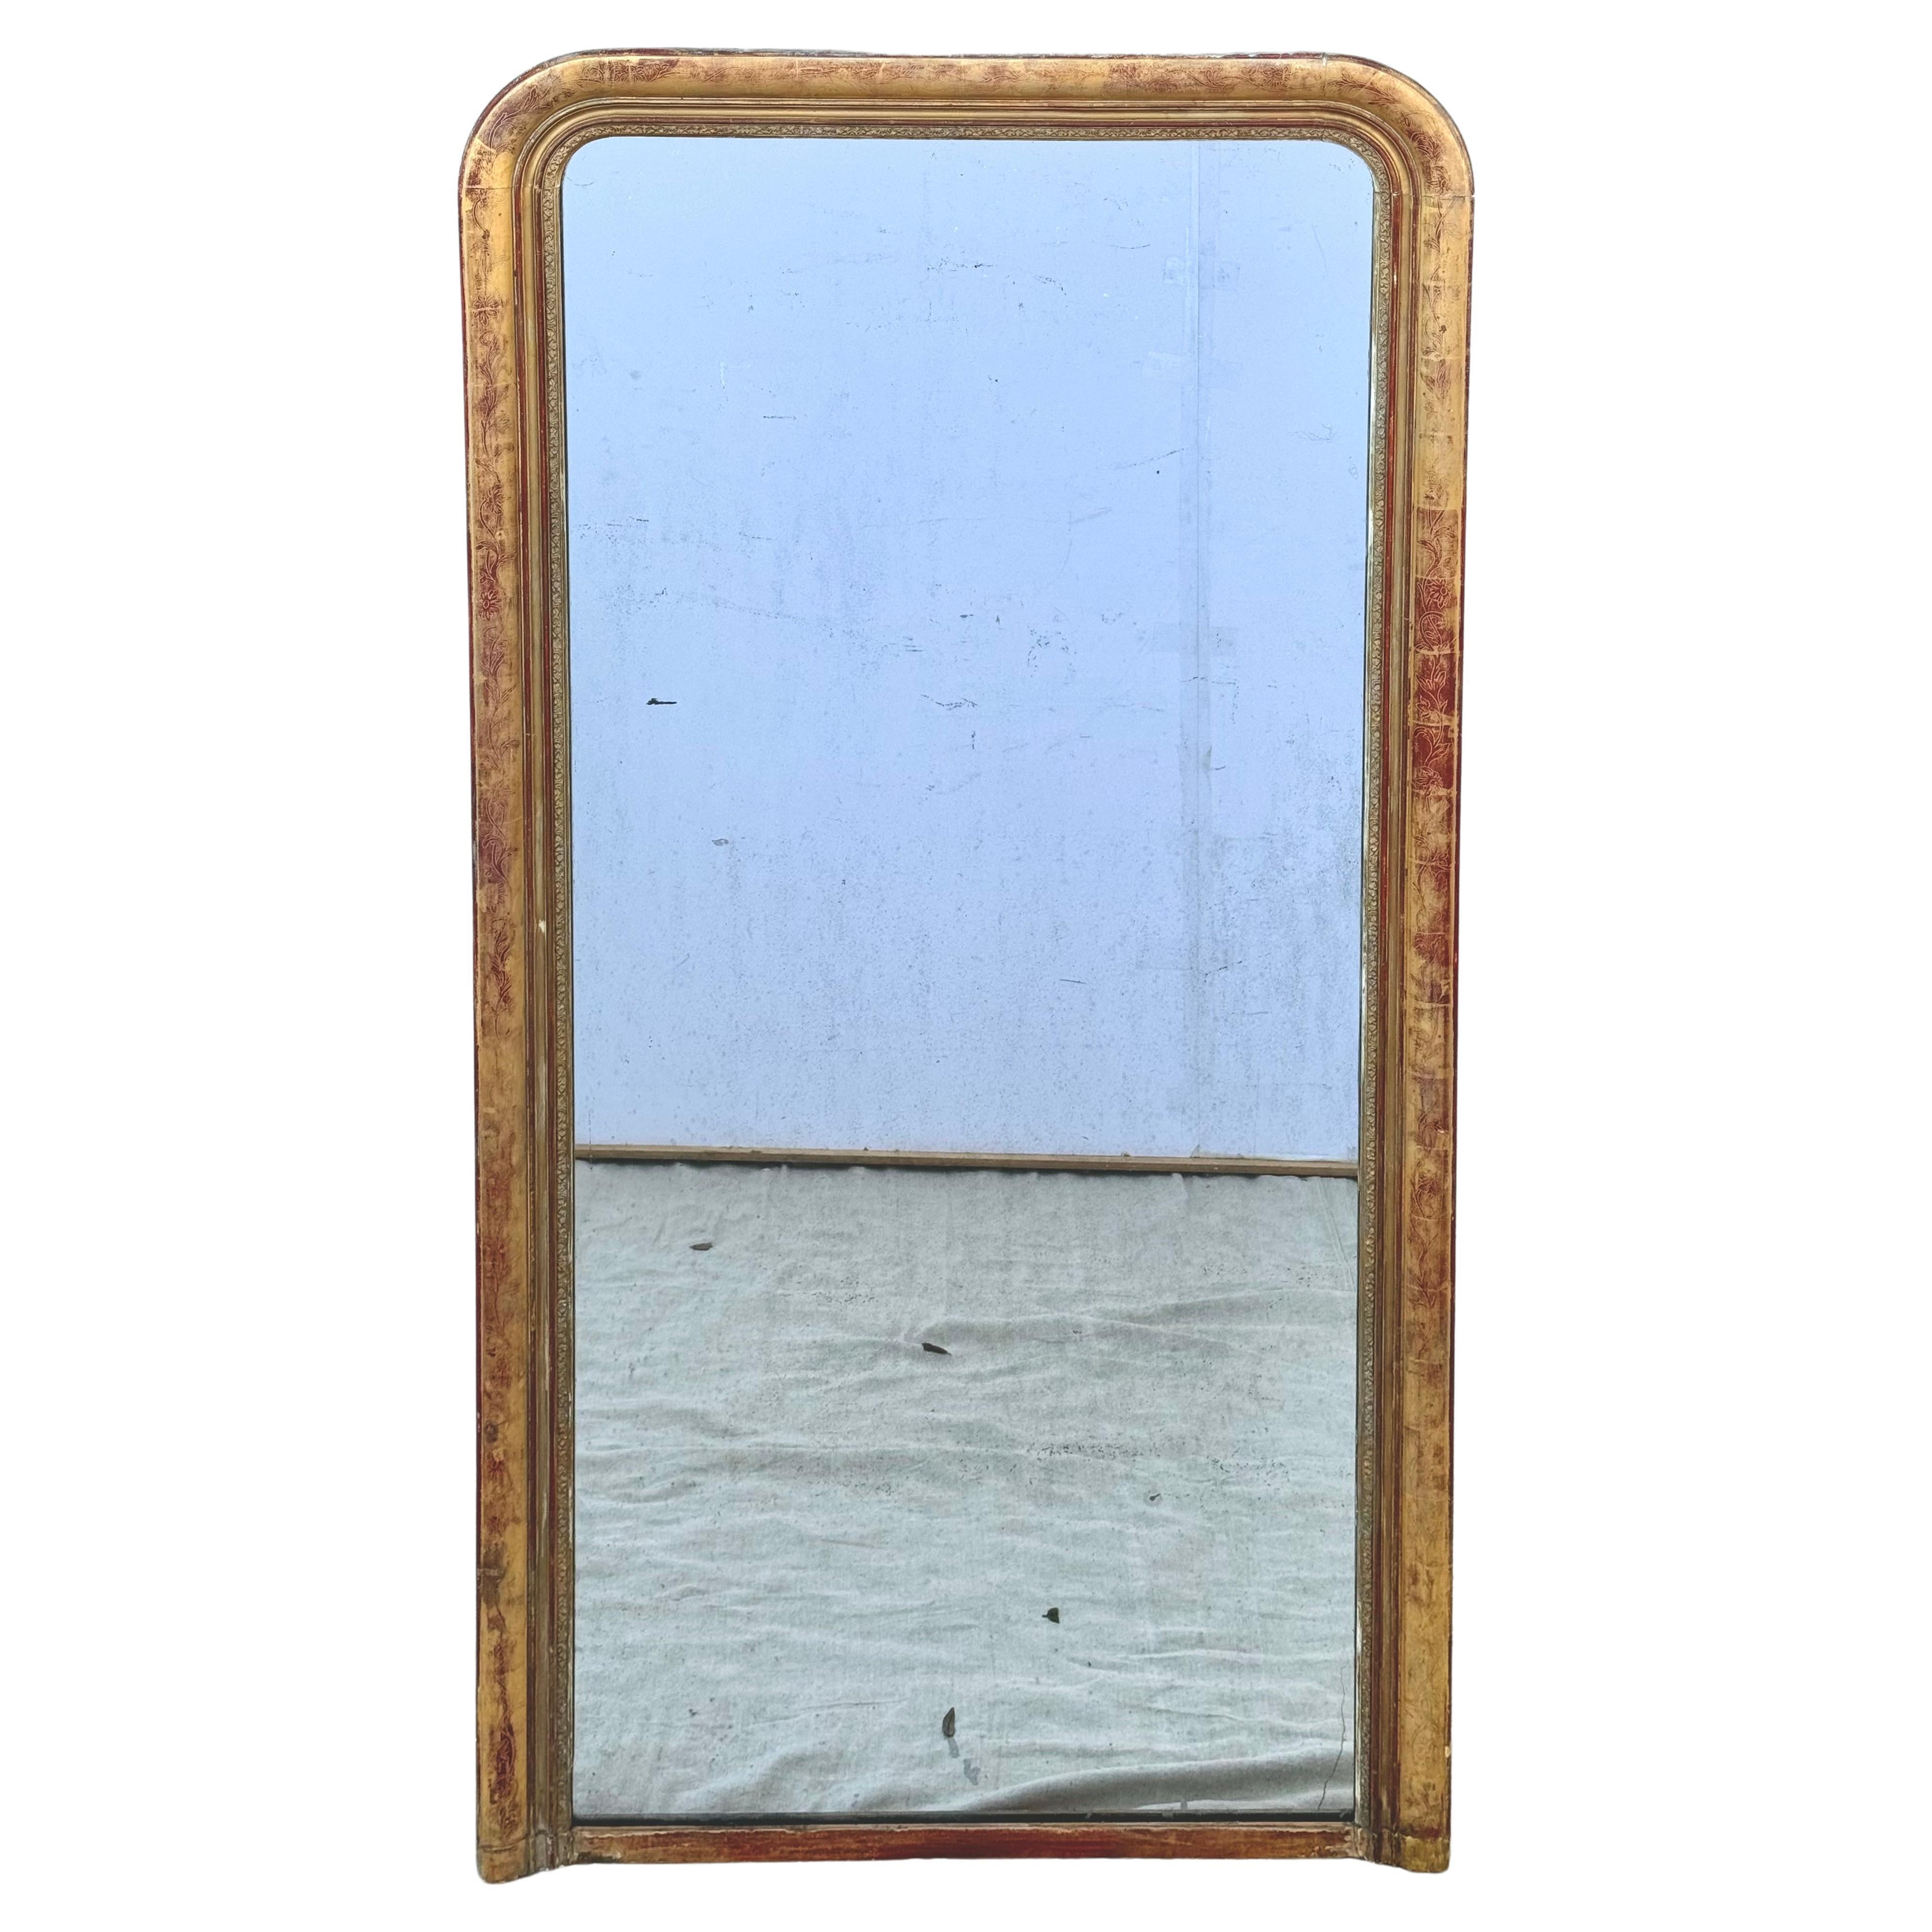 Very Large, 6 ft 8 in, 19th Century Louis Philippe Giltwood Pier Mirror. Antique gilded arch top mirror is of tall proportions. Mirror has gilded foliate border. Retains the original 19th century mirror. The giltwood finish now has a wonderfully